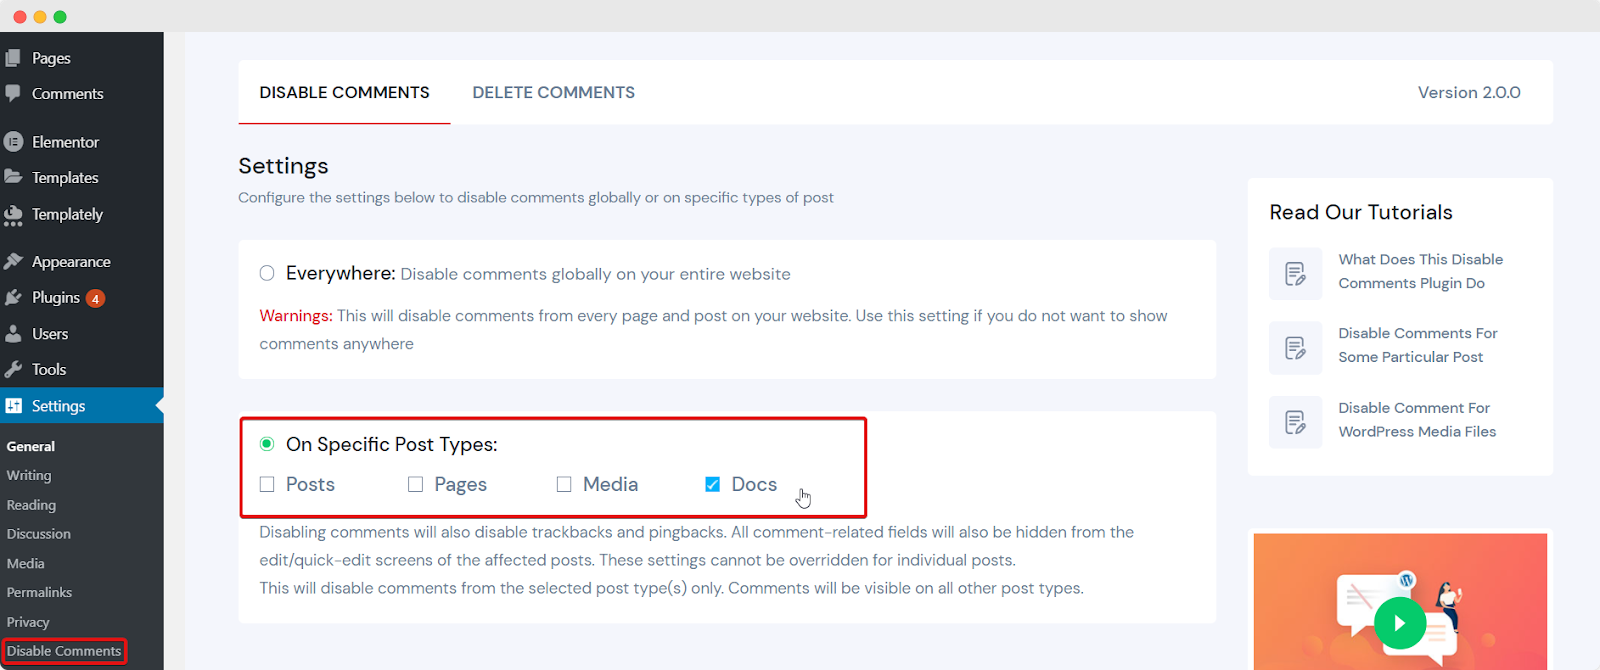 WPDeveloper Acquired Disable Comments WordPress Plugin With 1 Million+ Users 1